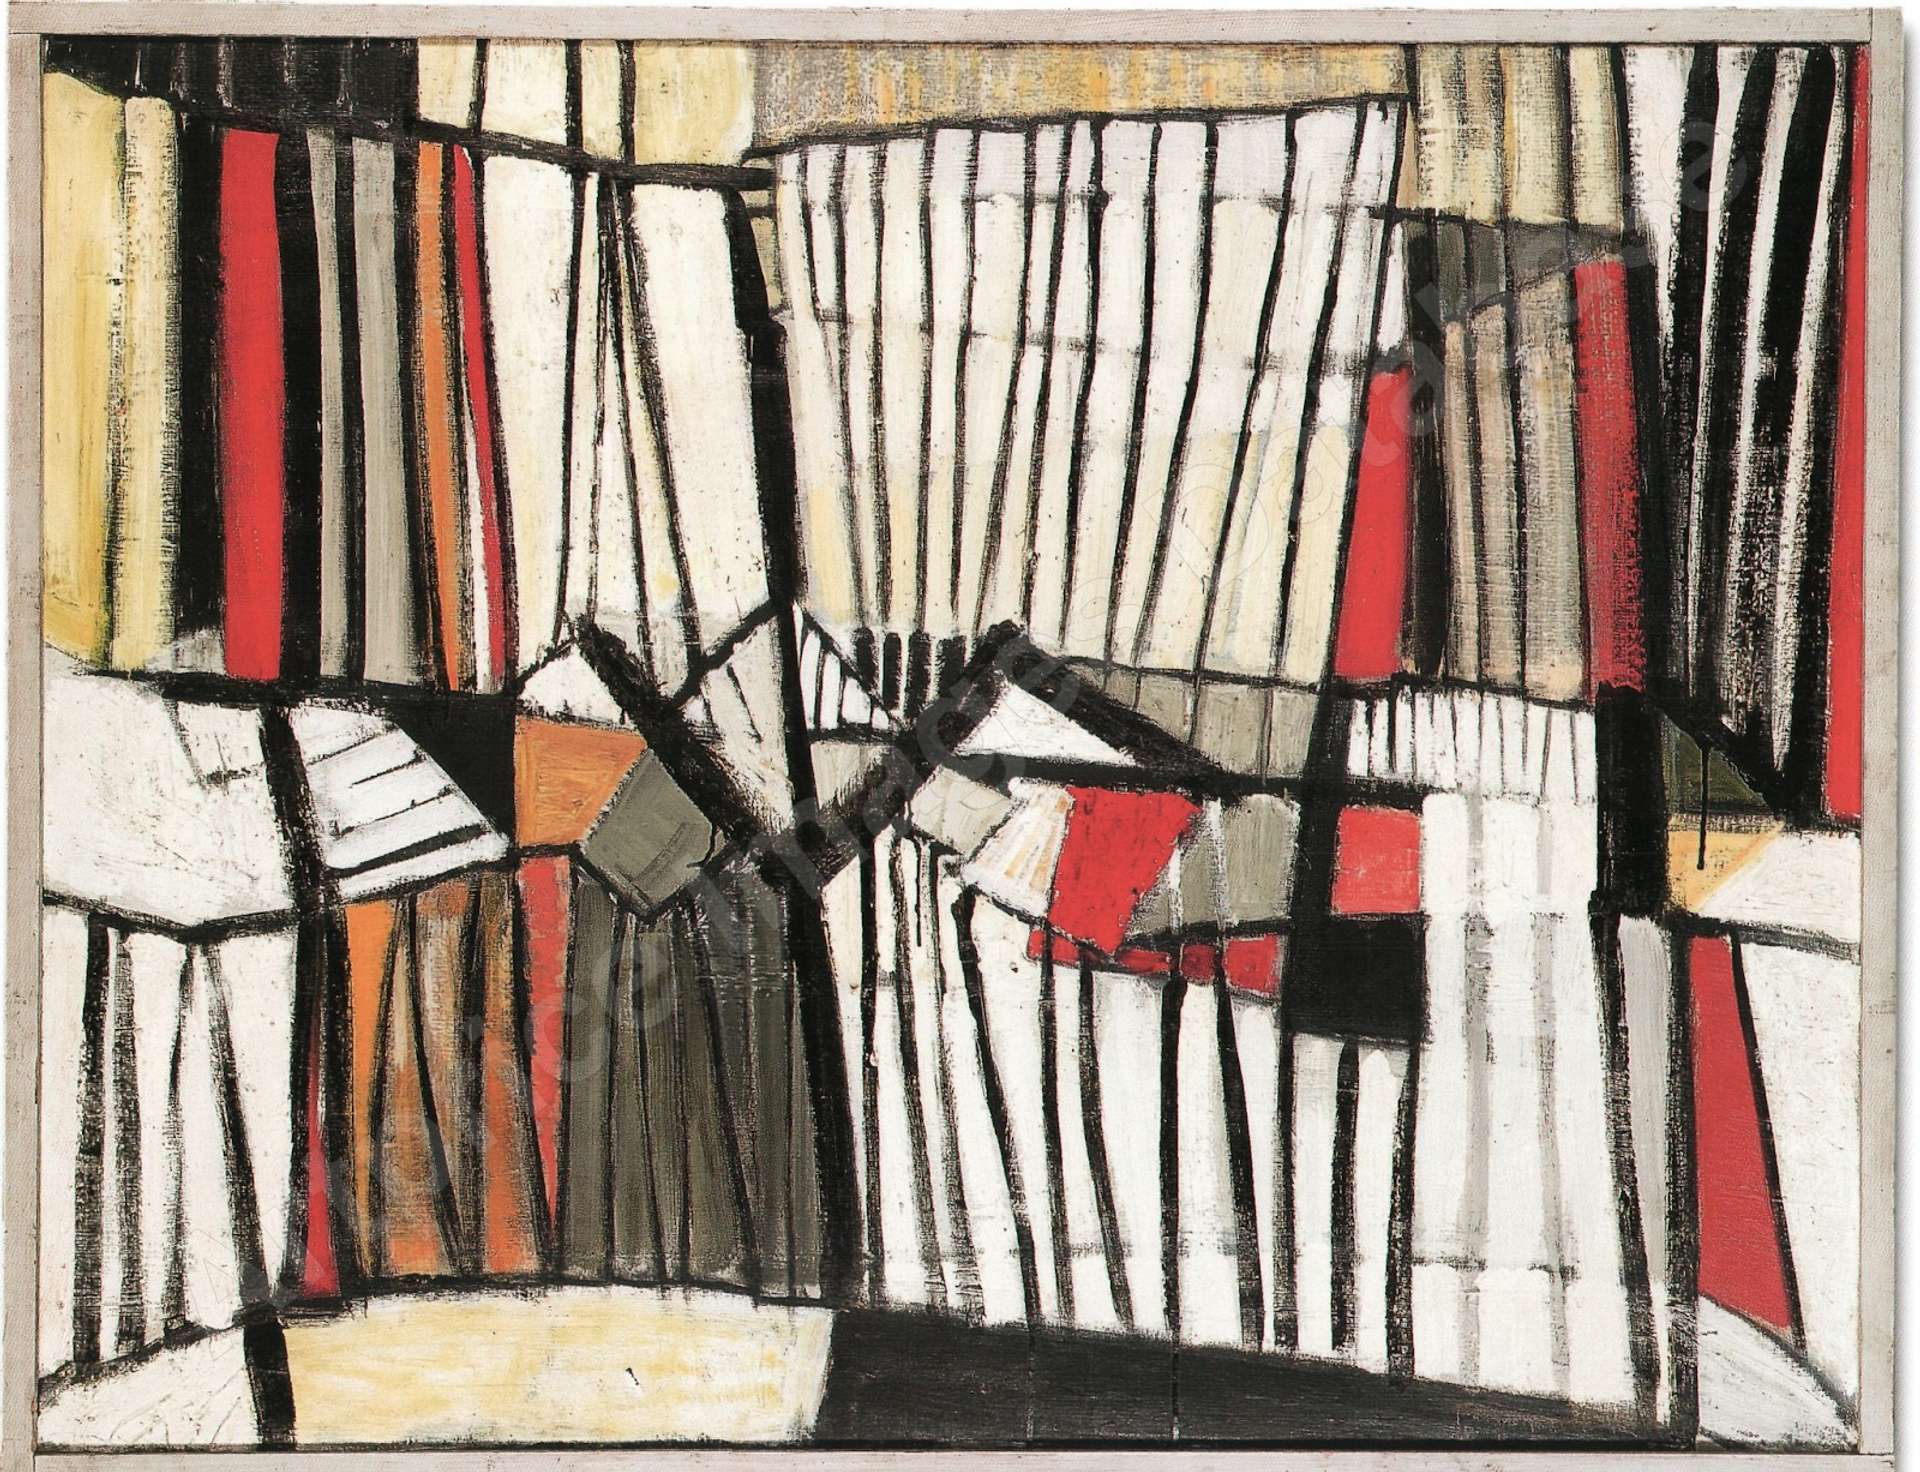  An abstracted canvas featuring vertical lines in repeating shades of beige, red, black, and white. The centre of the canvas is intersected by a geometric zigzag pattern in various colours.